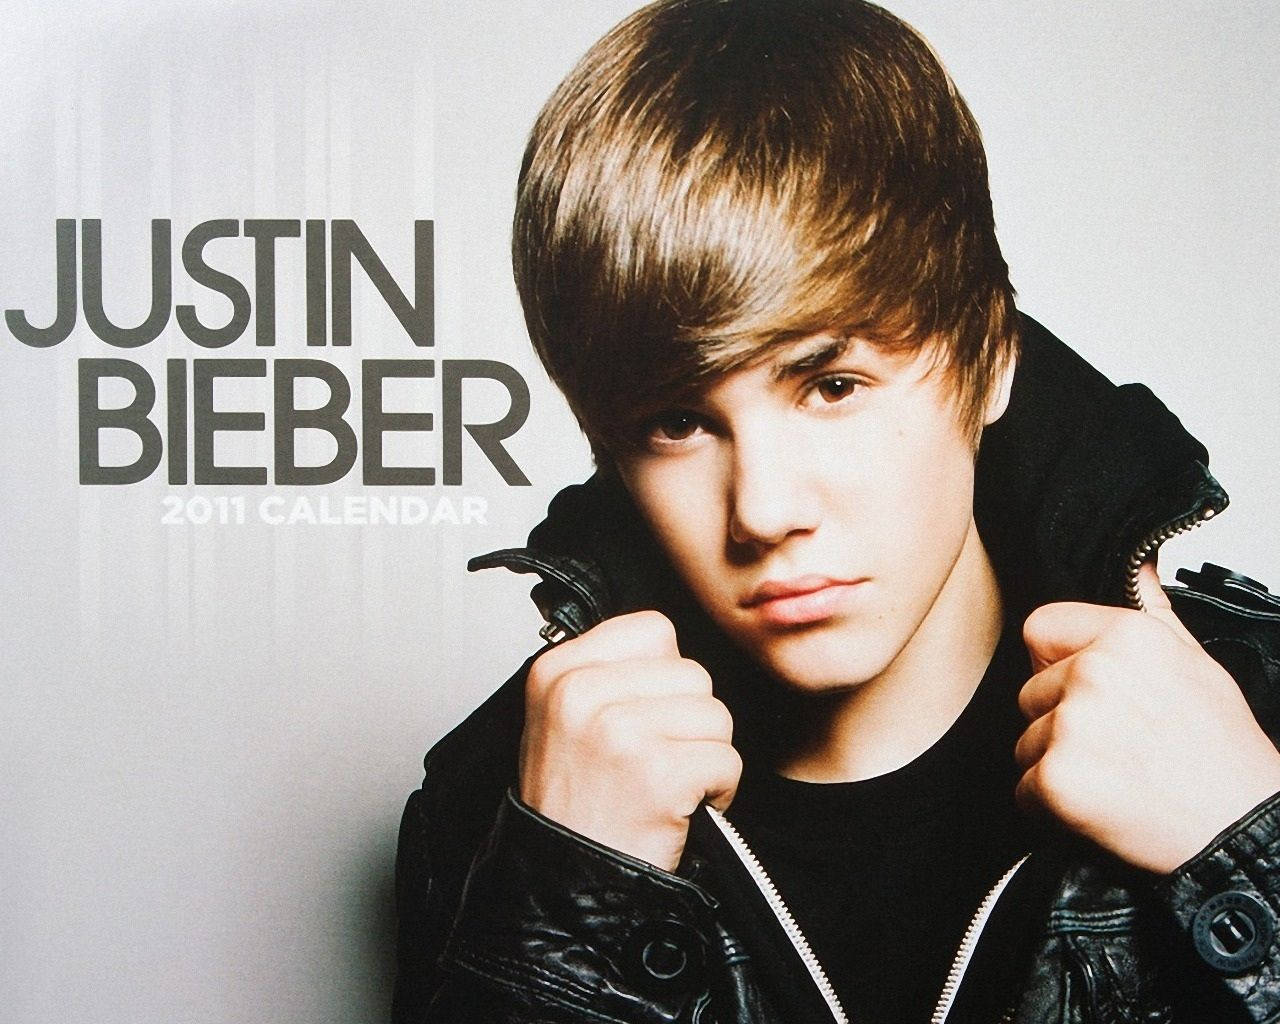 Justin Bieber looking casual and cool for the 2011 Calendar Cover Wallpaper